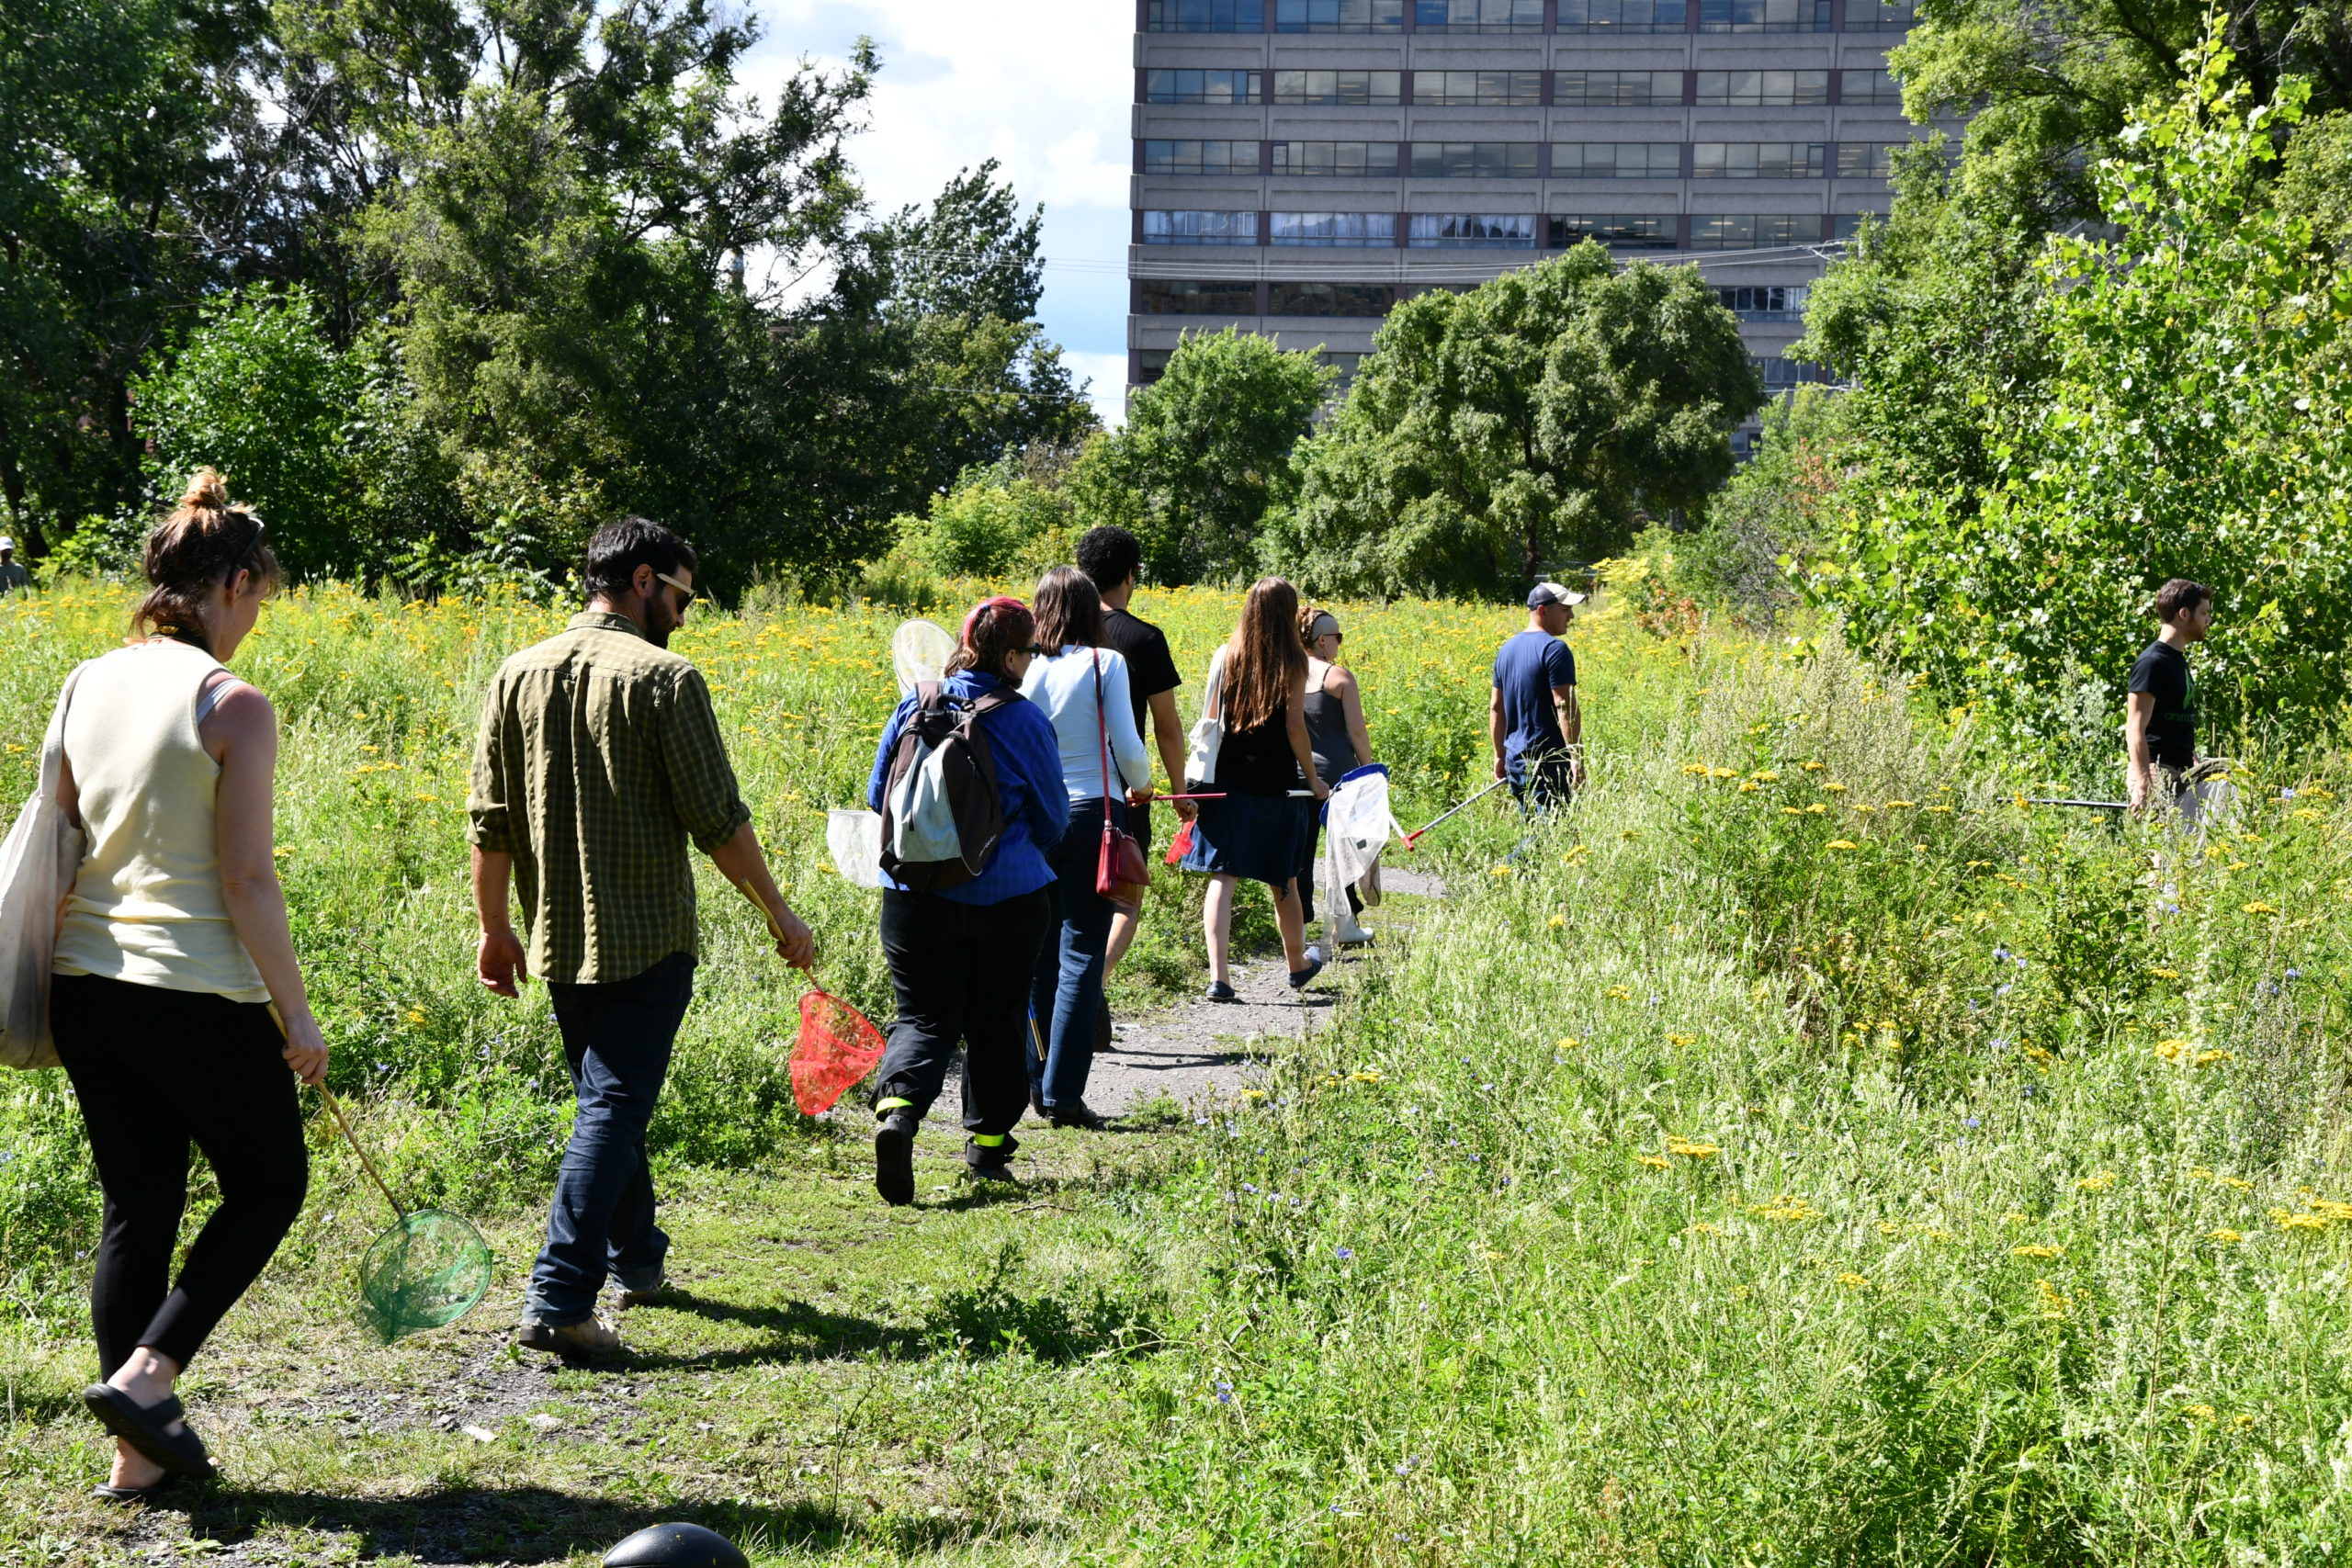 a group of people walking in an urban garden